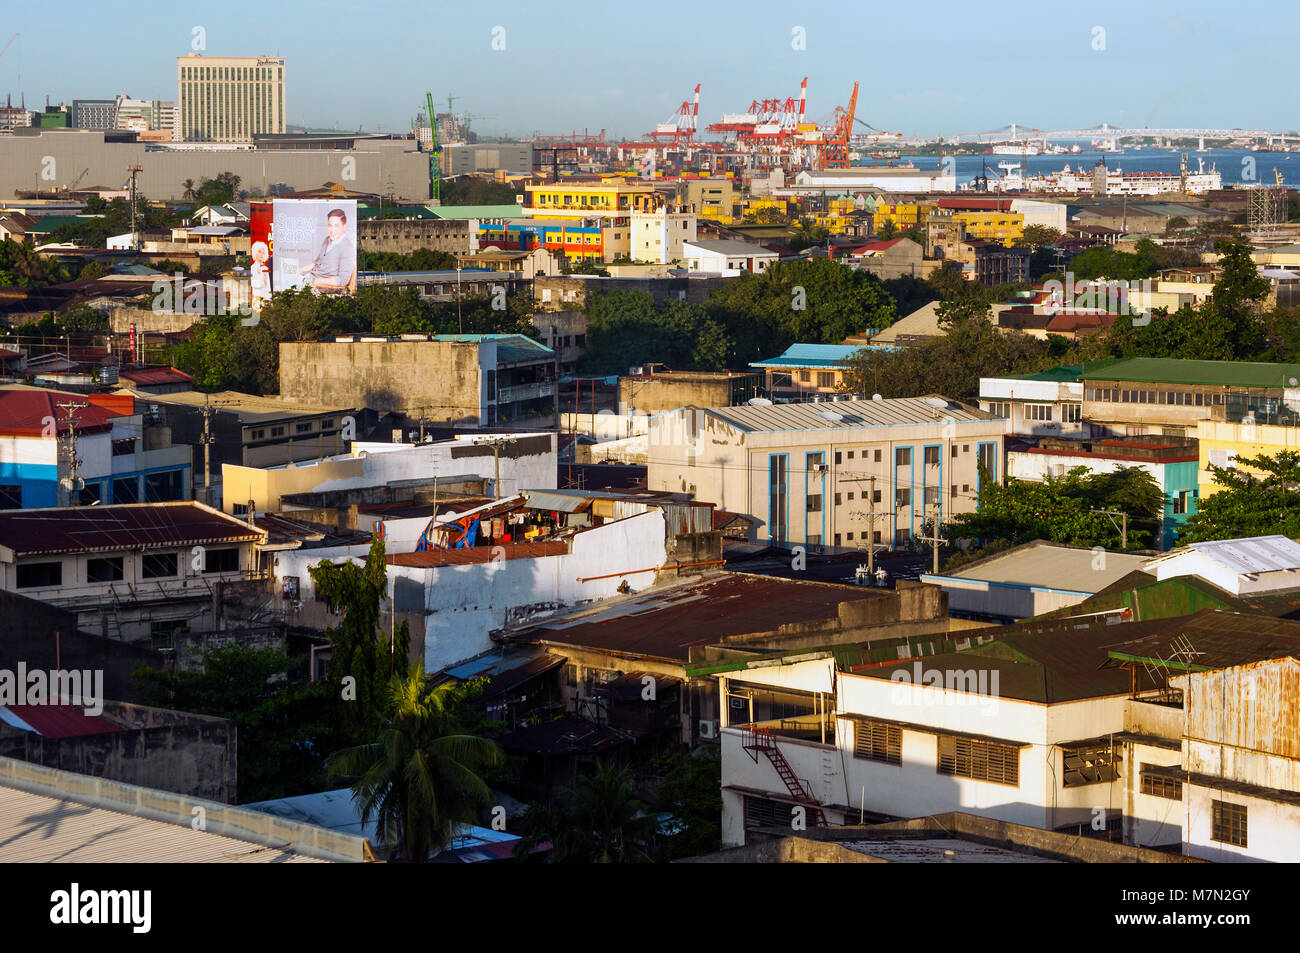 Aerial view of Cebu City looking east, with port area and Mactan Island beyond, Philippines Stock Photo